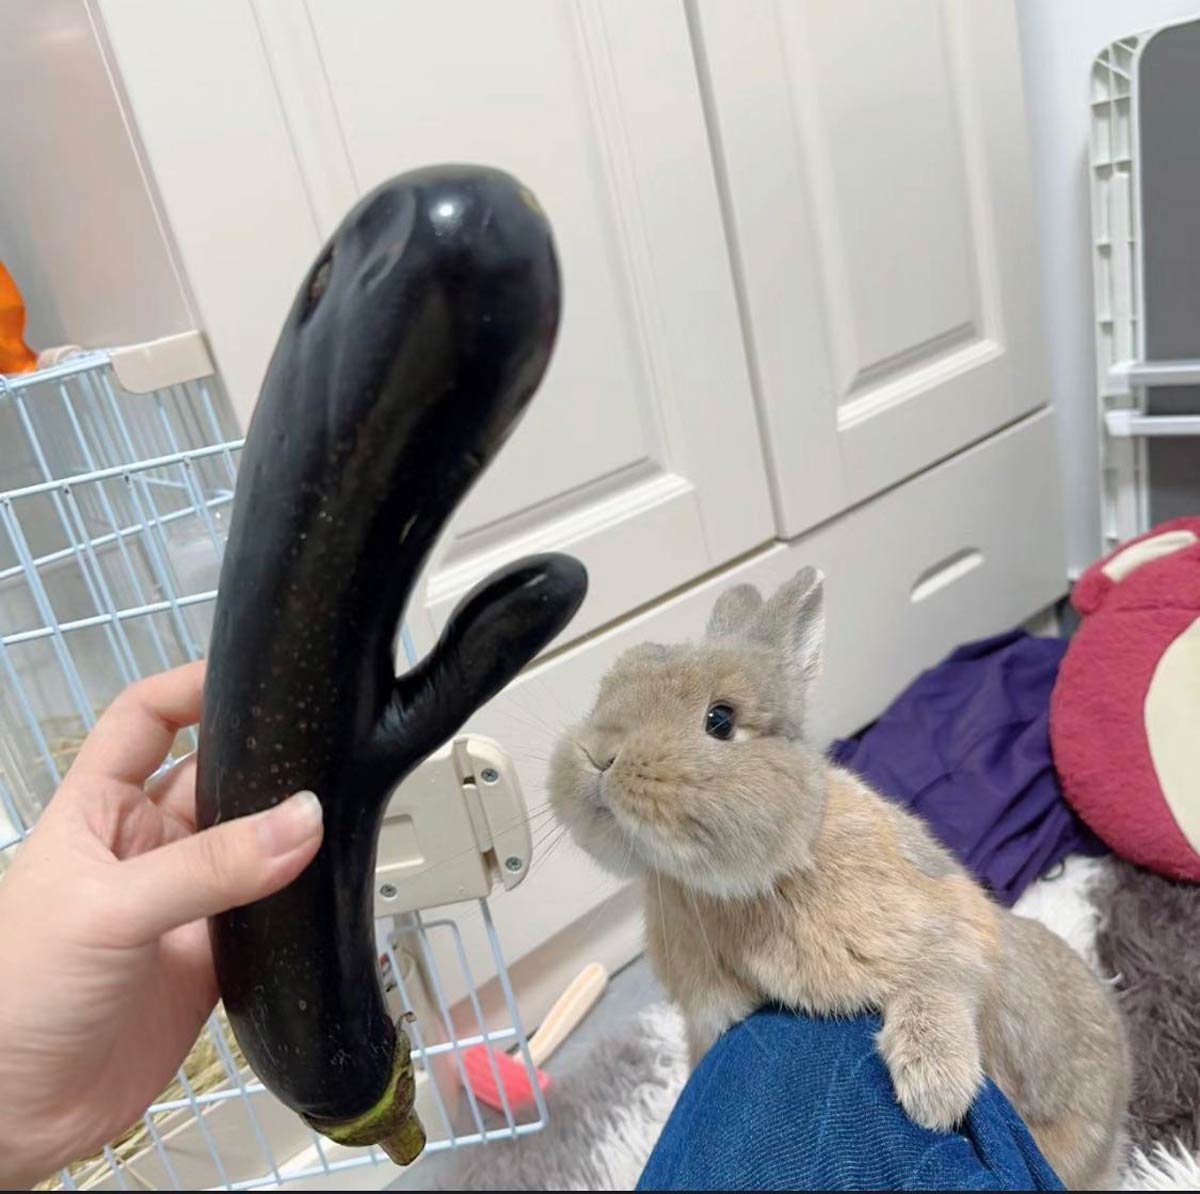 This eggplant is…really big (bunny for scale)